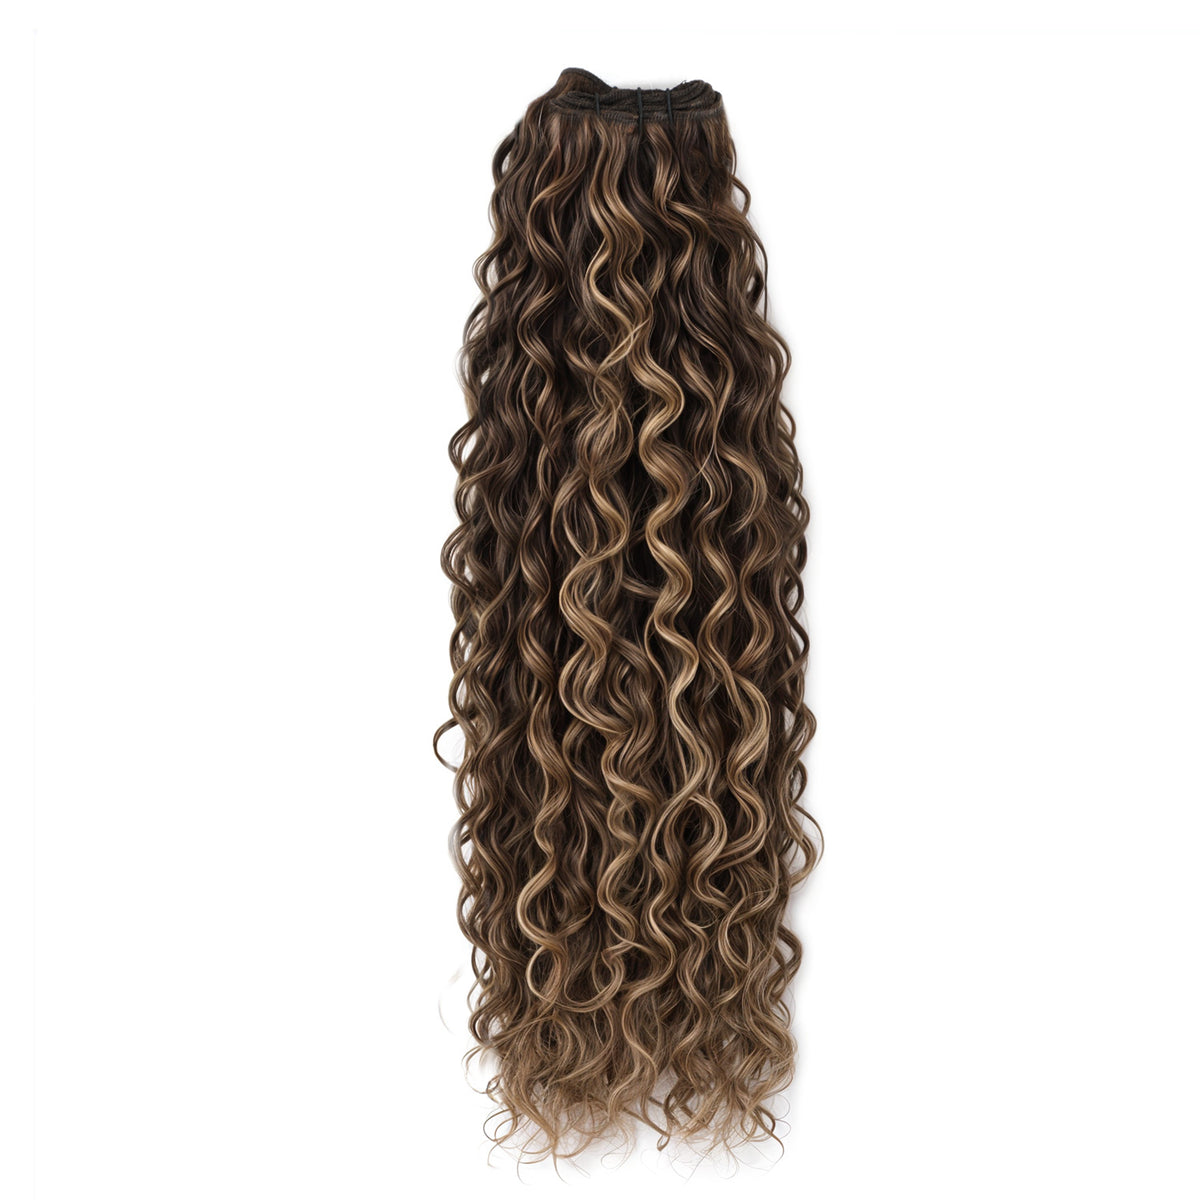 Weft Curly Hair extensions Human Hair real hair extensions